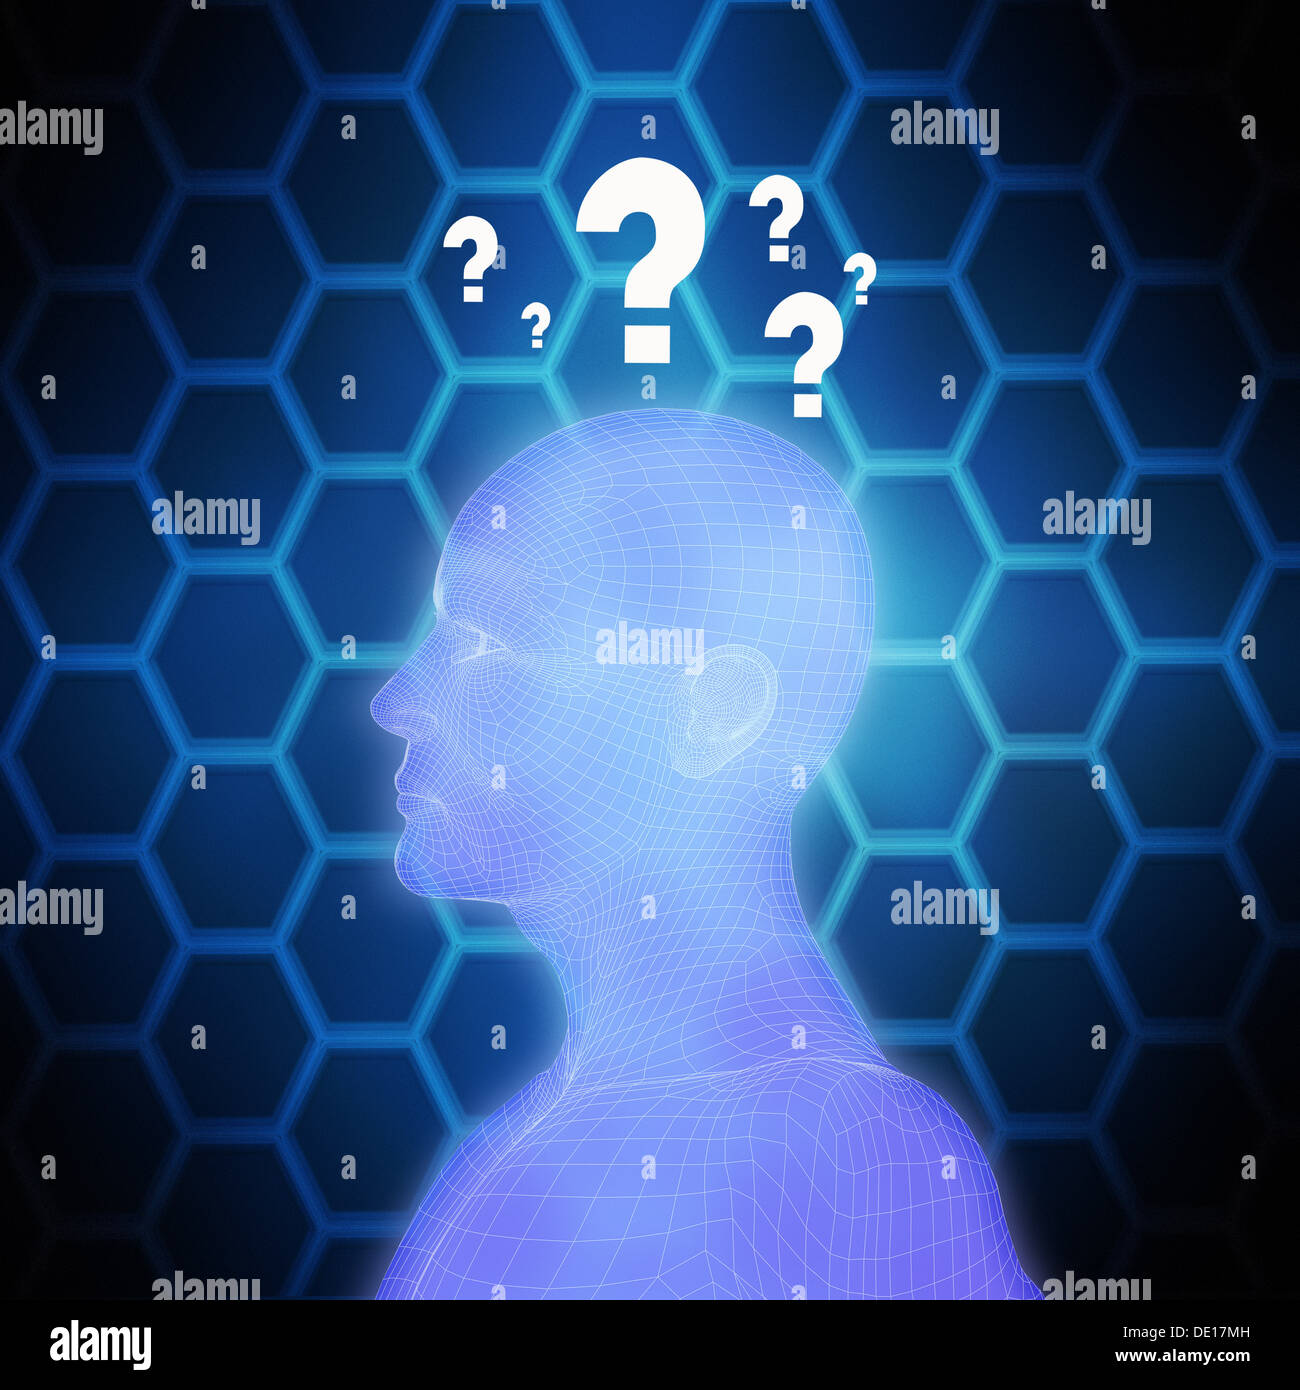 human head with question marks Stock Photo